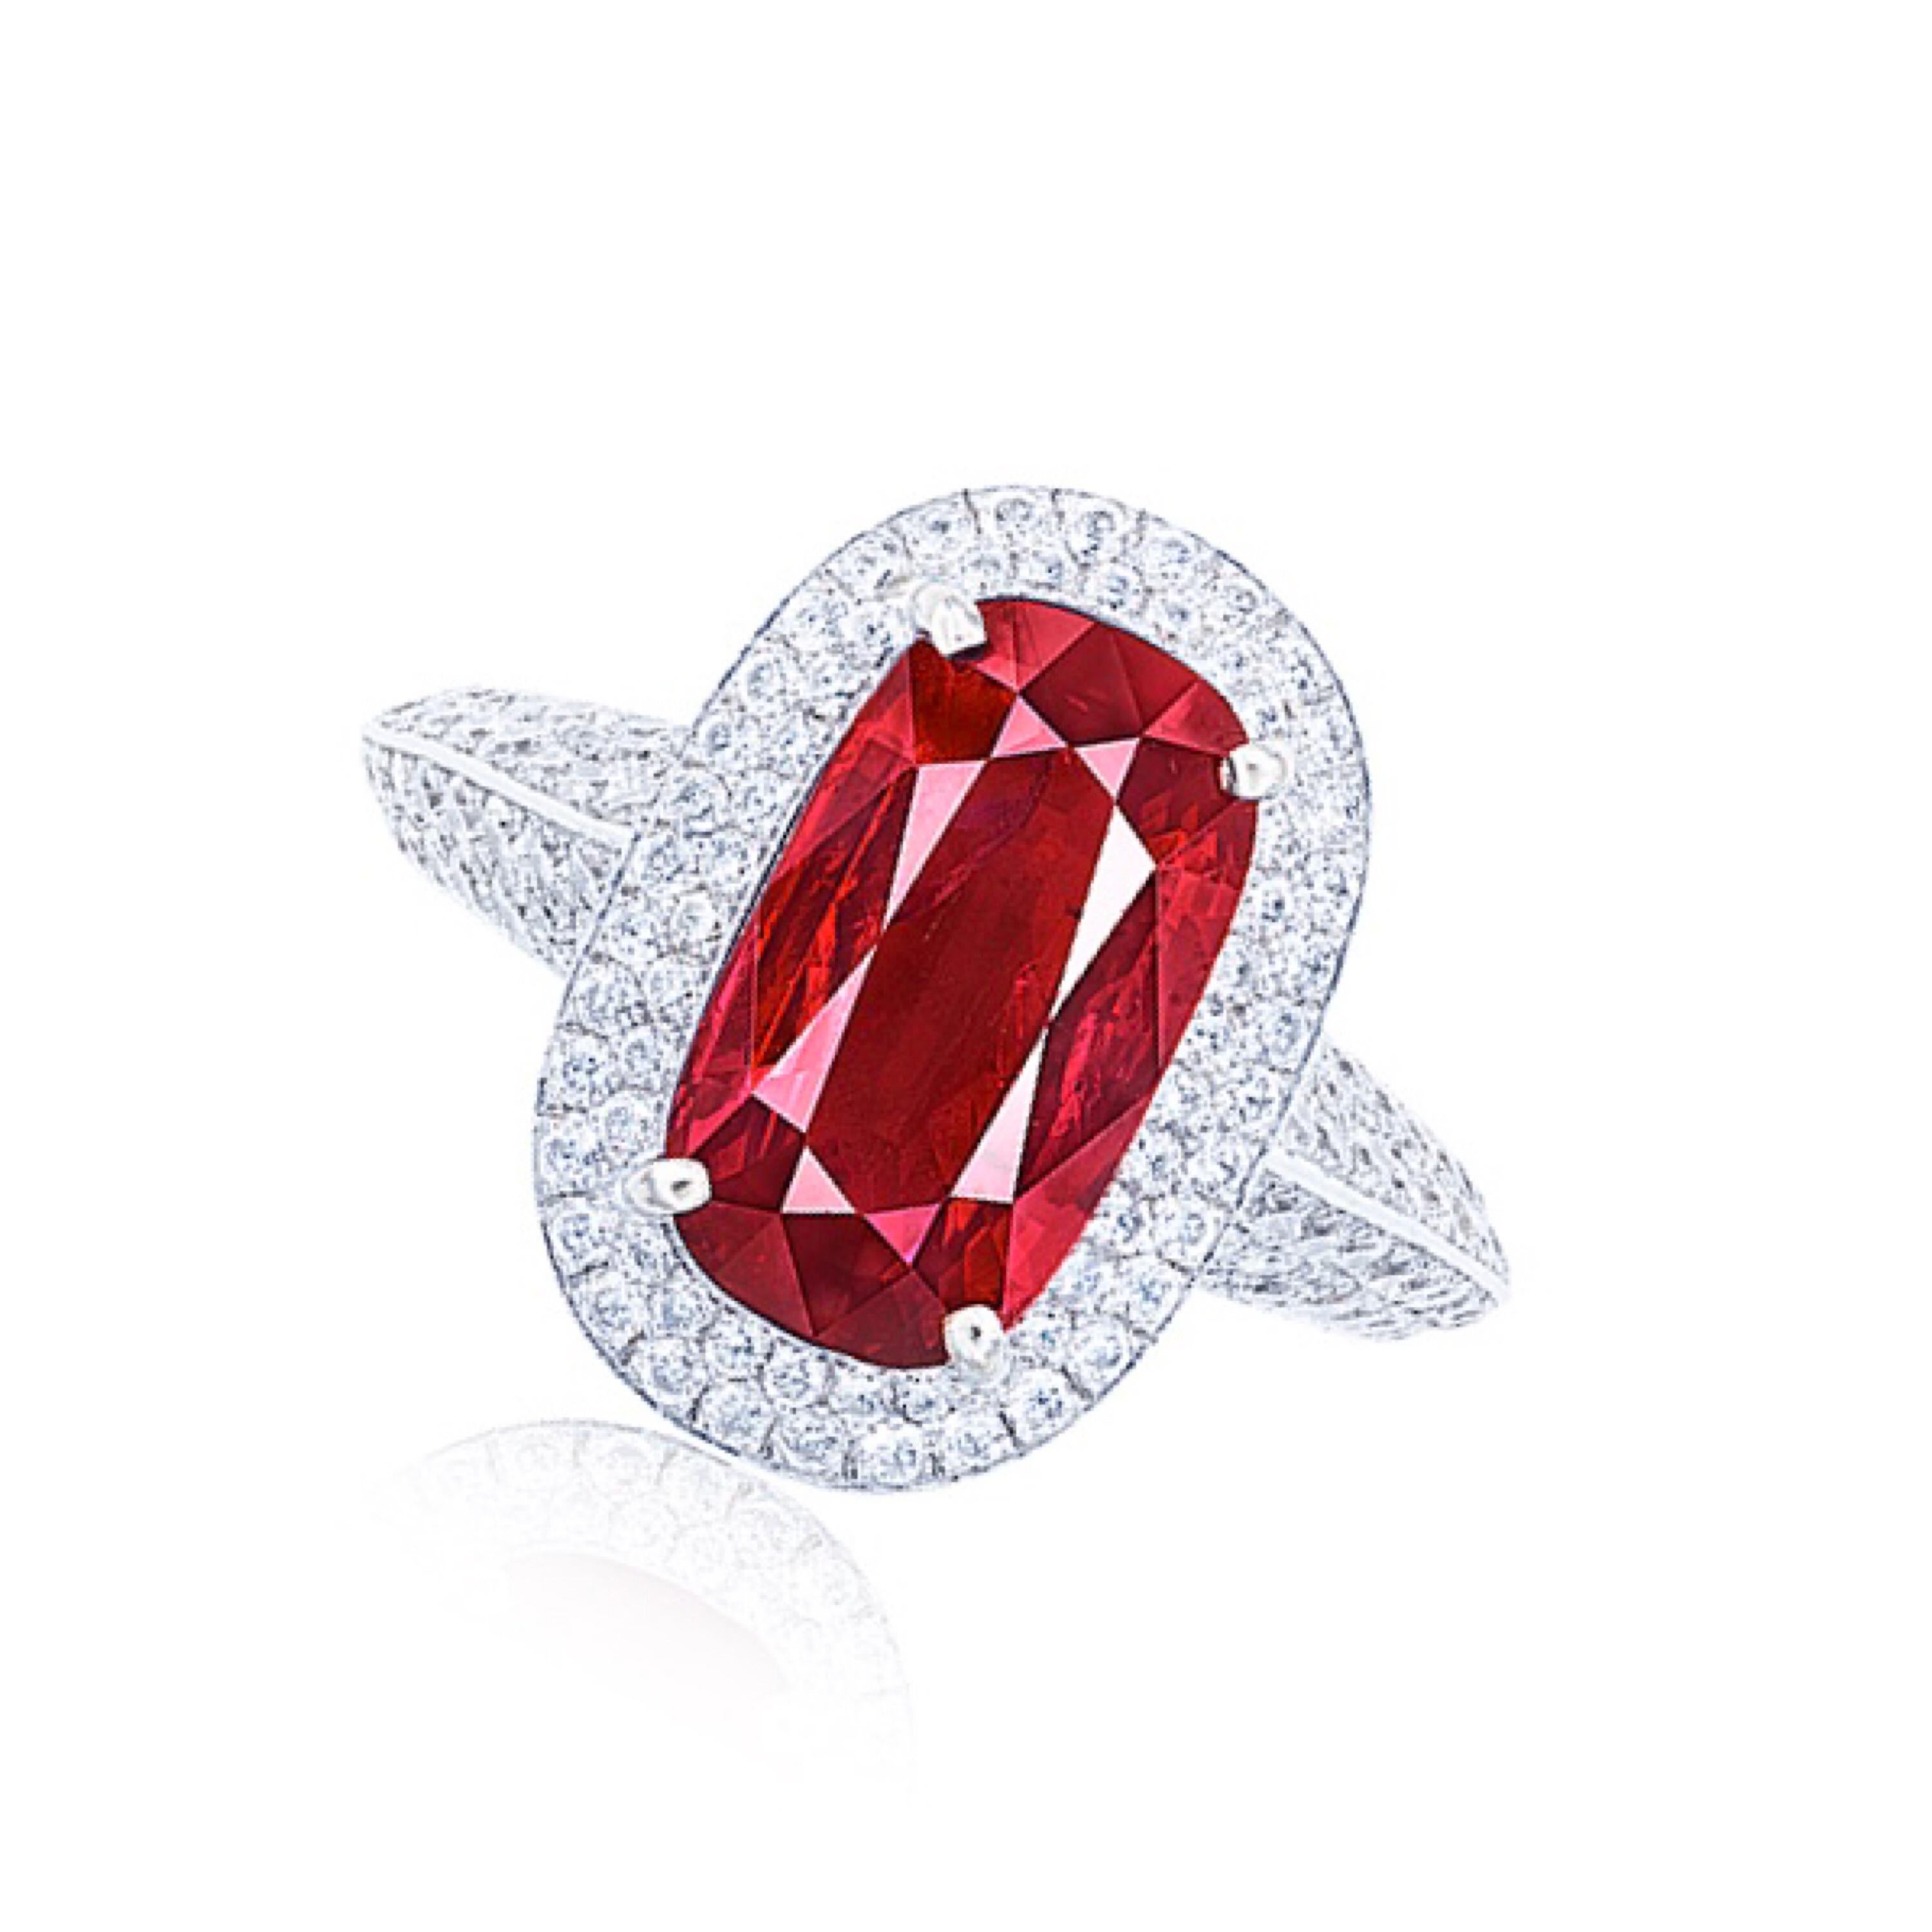 Showcasing a certified no heat Mozambique Ruby weighing 4 carats, of gorgeous rich red color. 
This piece was Hand made in the Emilio Jewelry Atelier, whom specializes in rare collectible pieces in the Fancy colored diamond, and precious stone